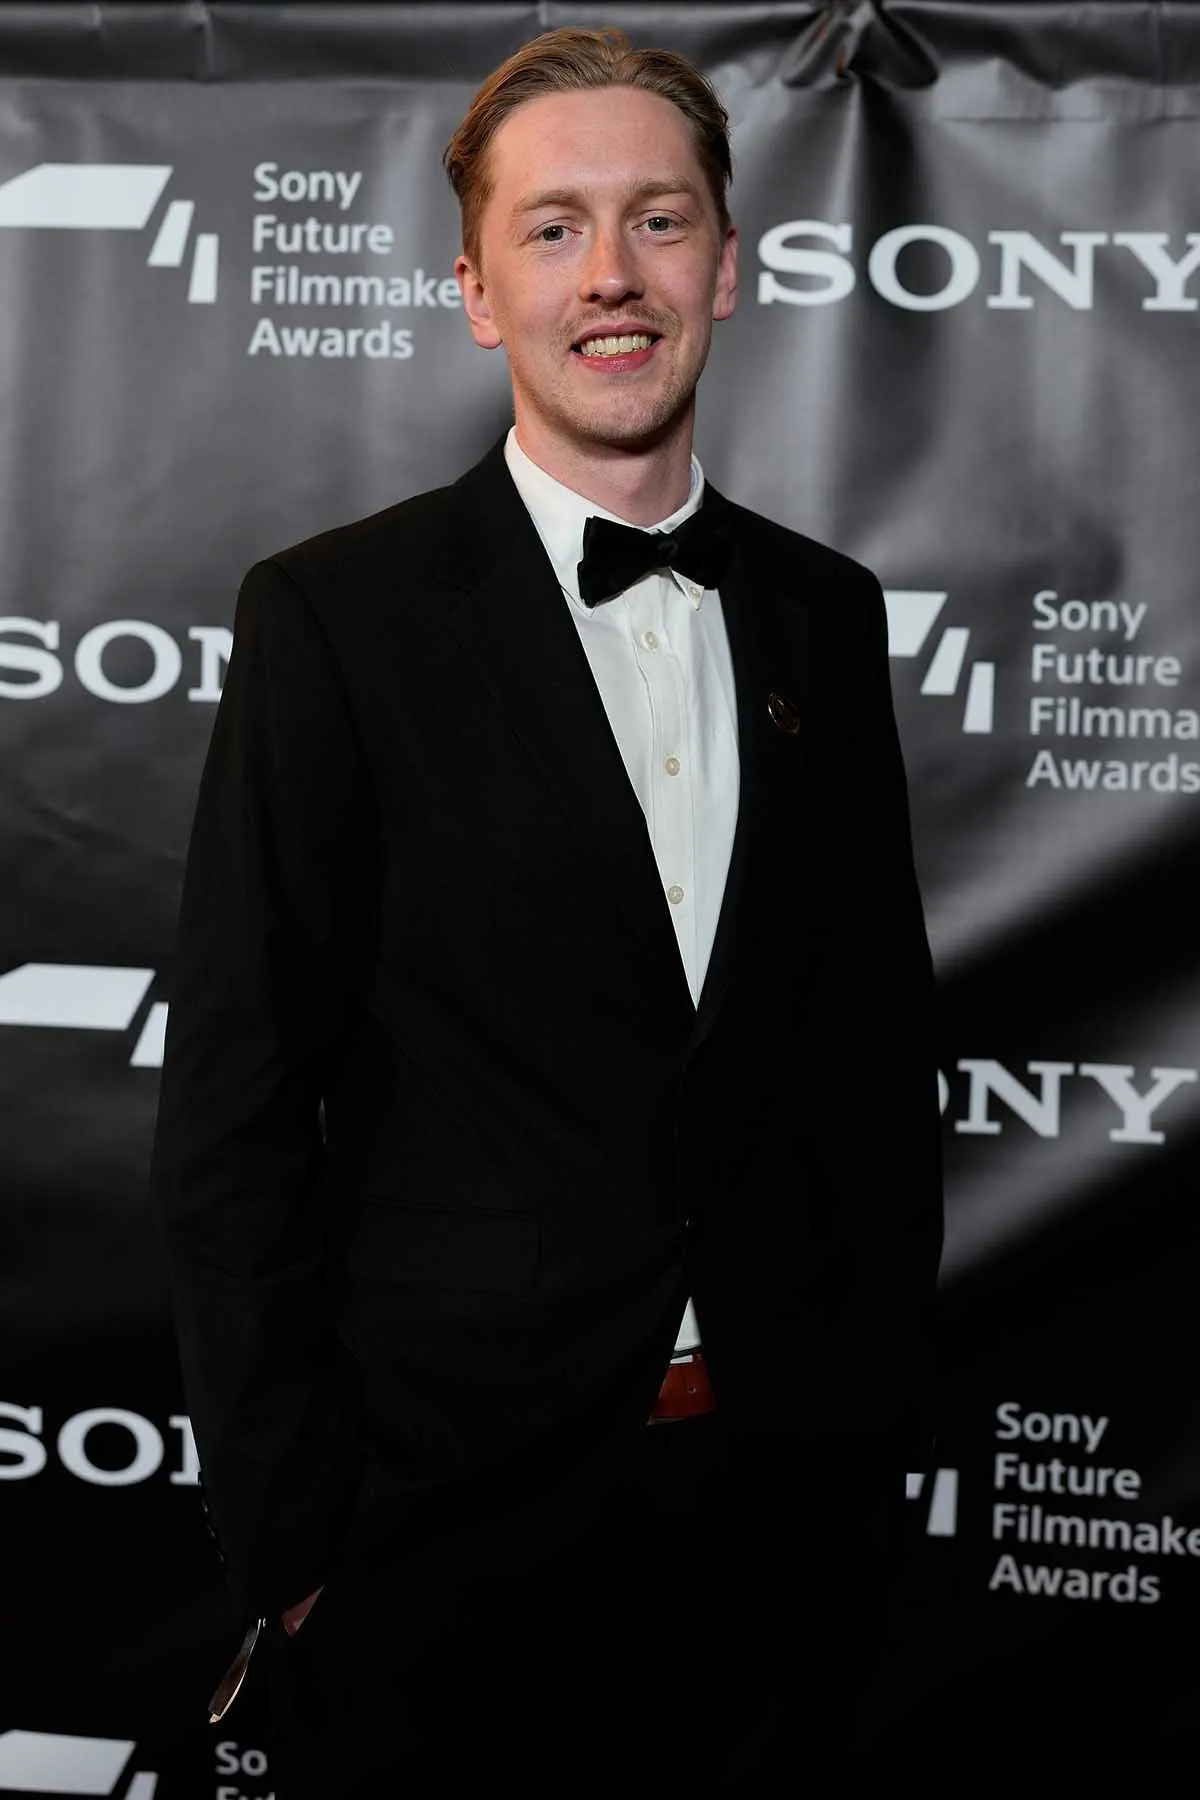 Alfie Barker on the red carpet at the Sony Future Filmmaker Awards 2023 